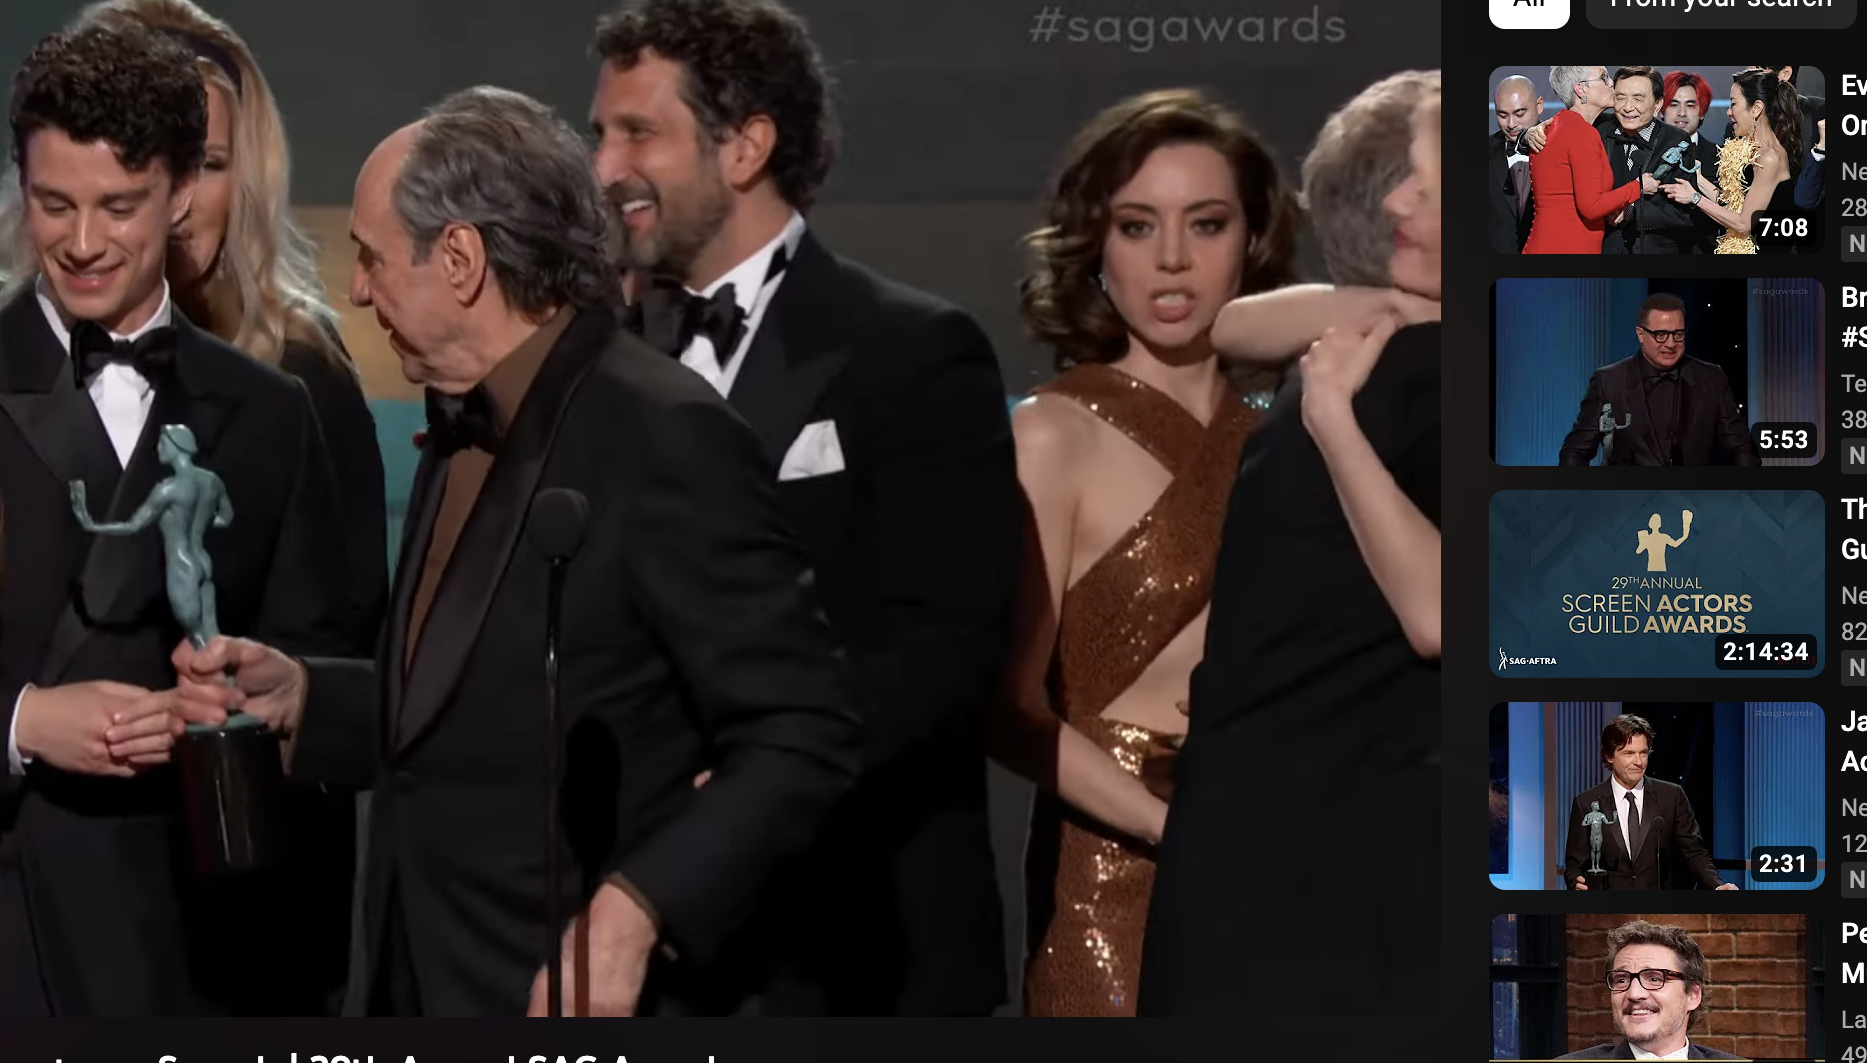 Aubrey Plaza confuses fans as she appears annoyed on SAG Awards